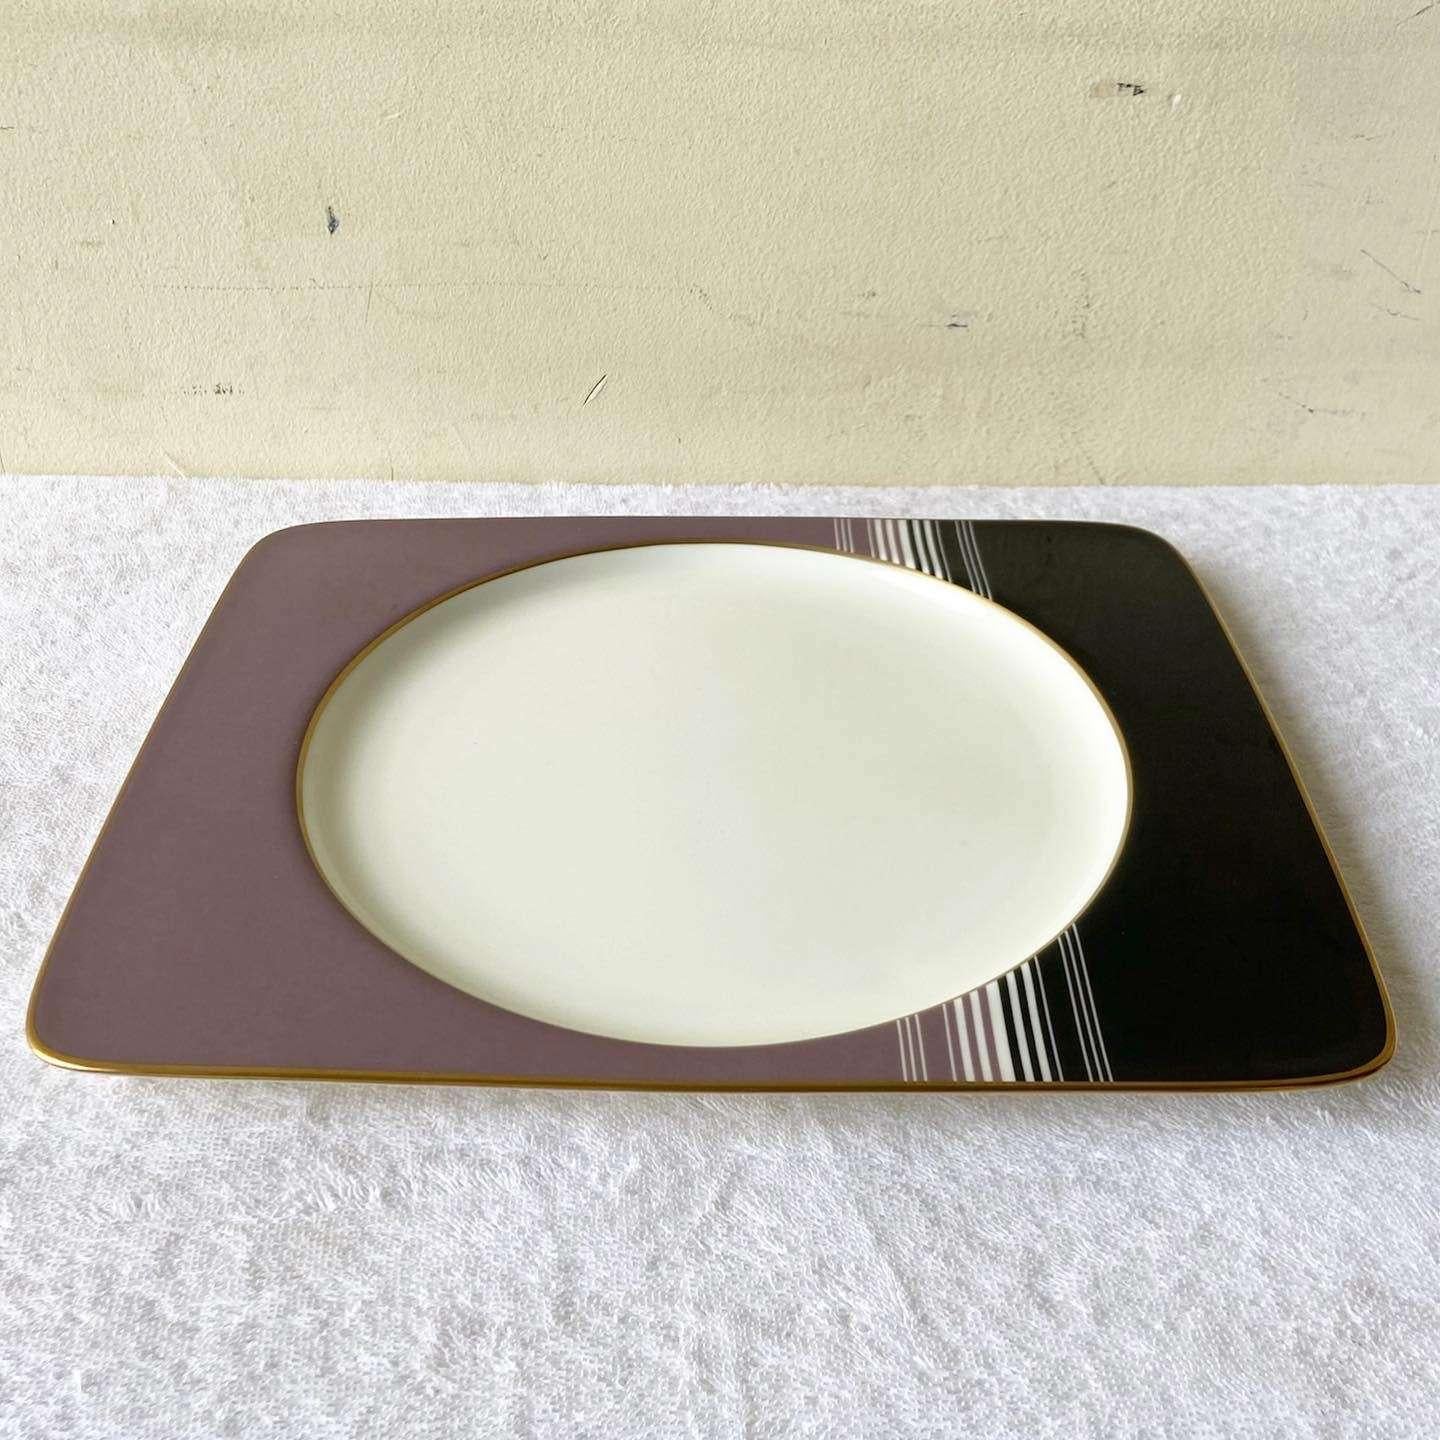 Exceptional vintage postmodern serving platter by Daniel Hechter. Features a purple and back design with a gold border and a white plate interior.